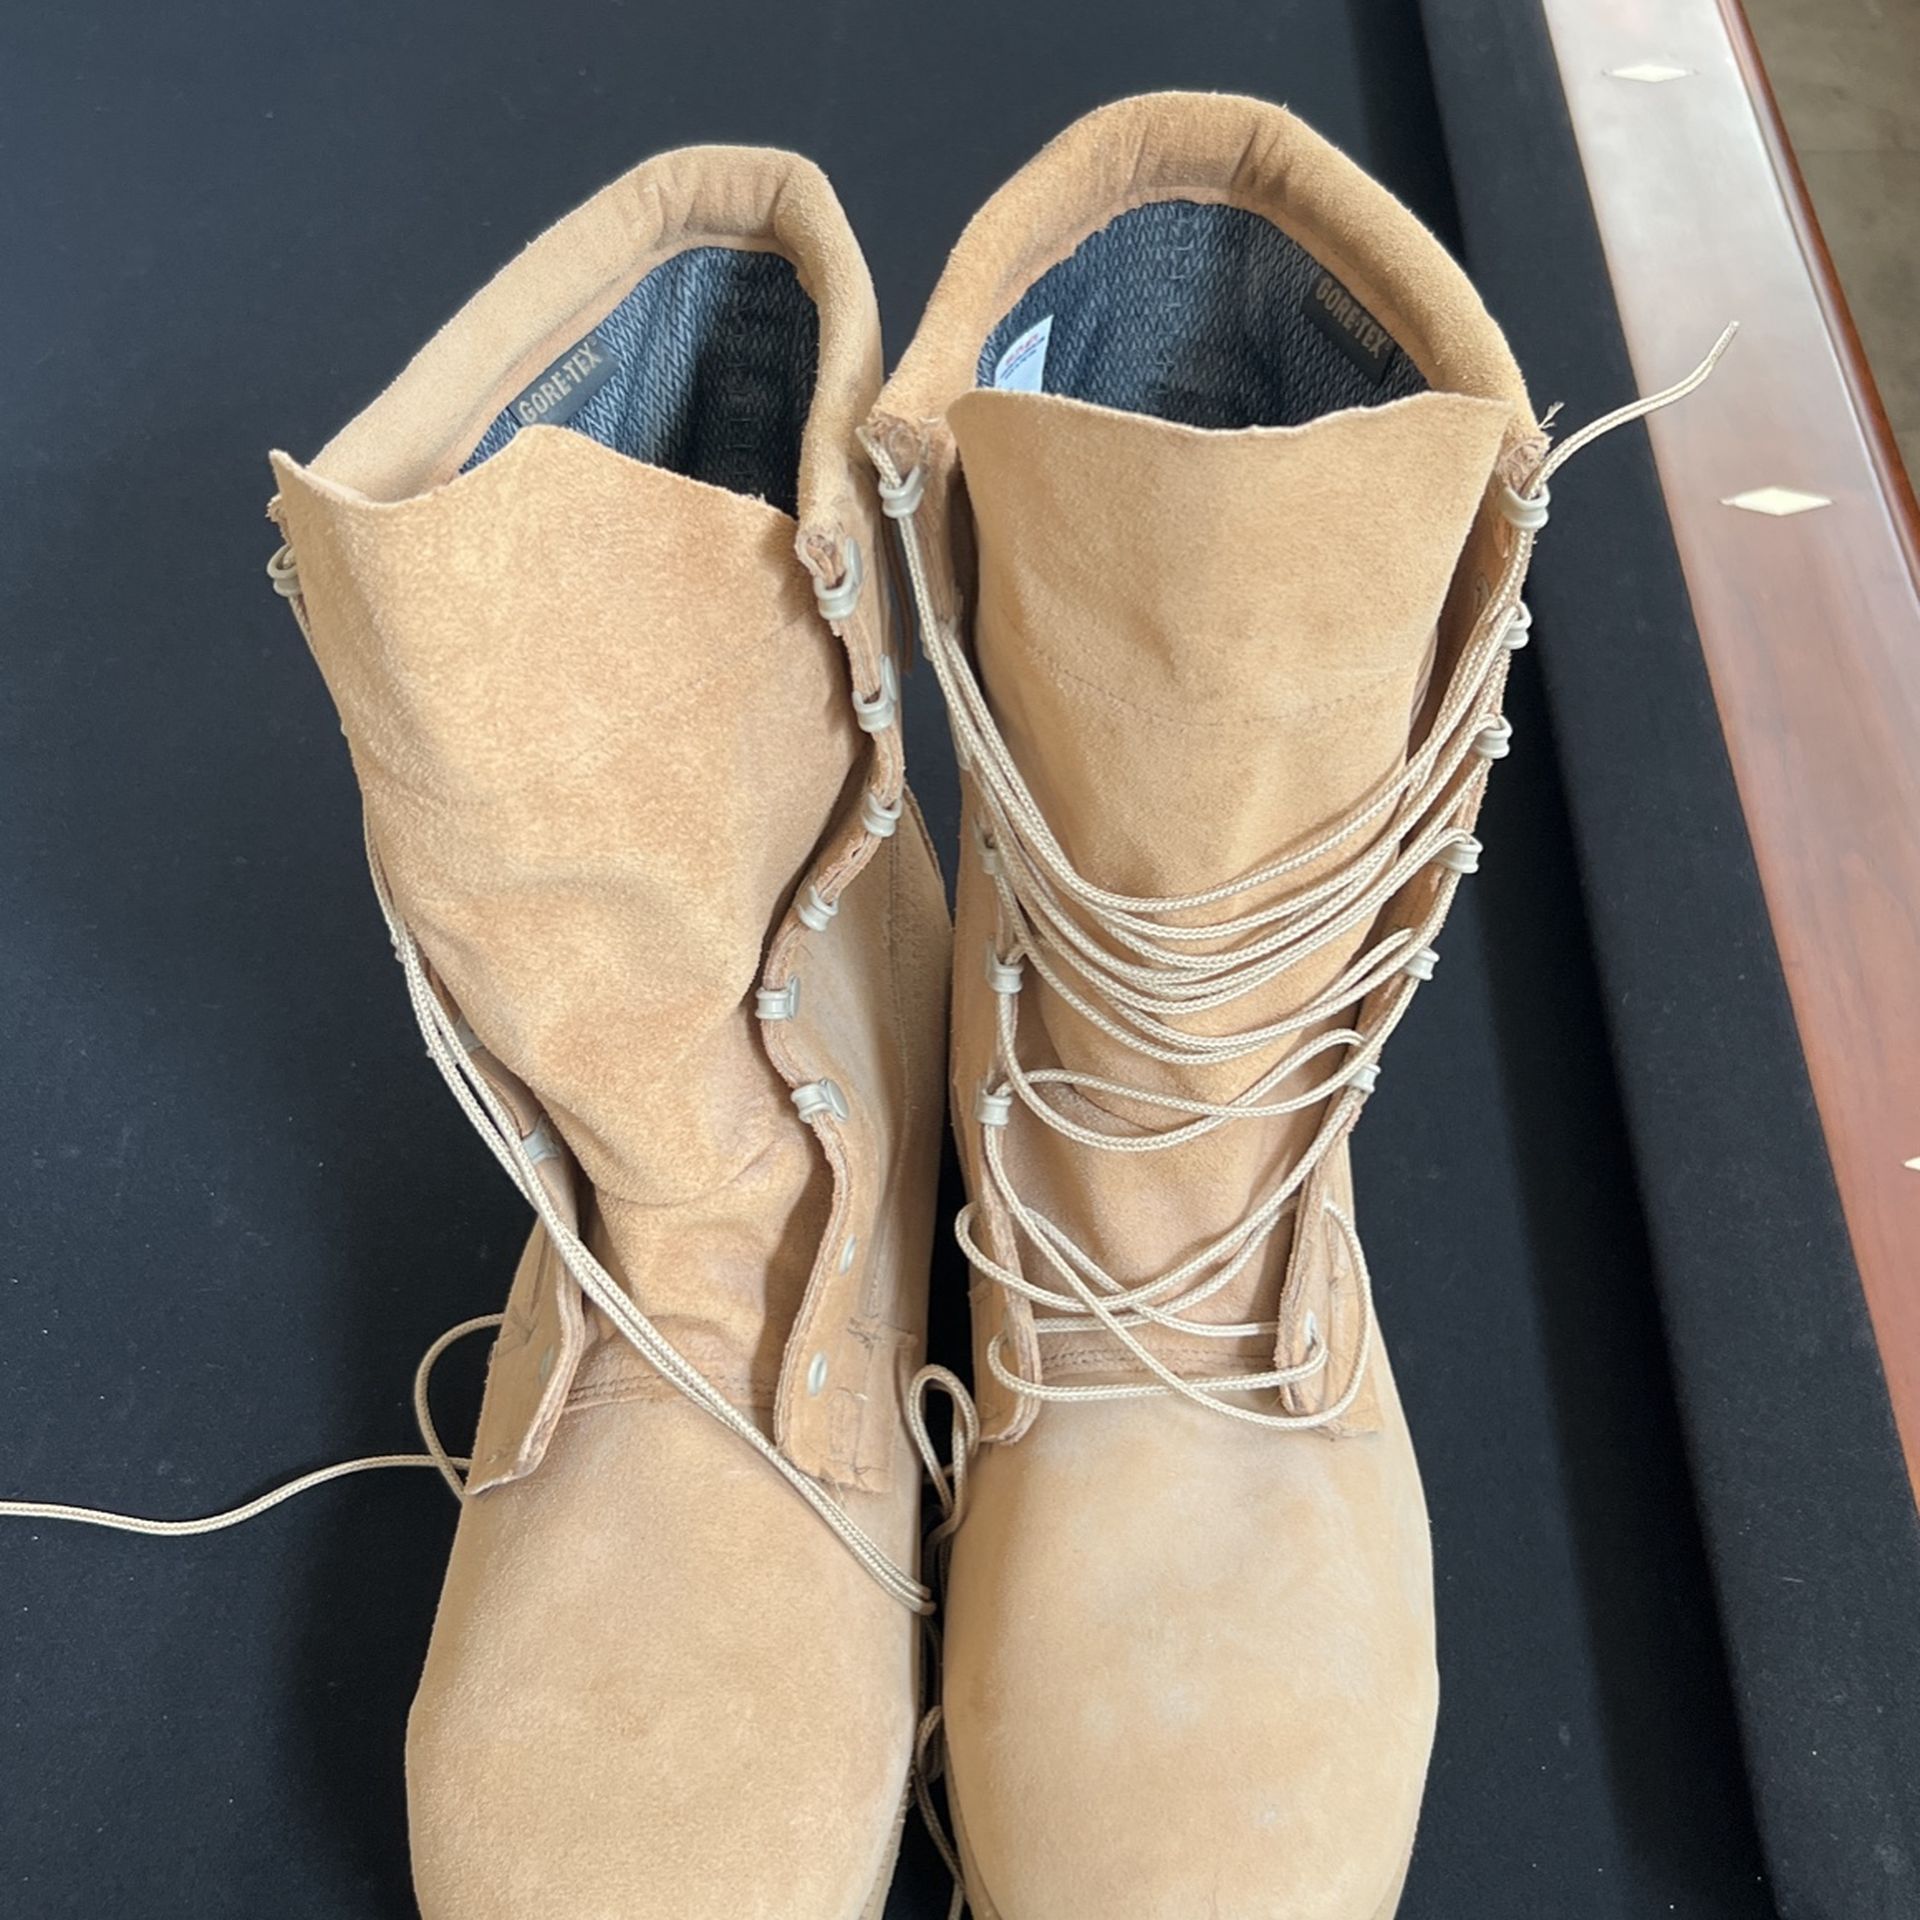 Belleville Tan Military Hunting Boots Gore-Tex Size 13.5 Regular